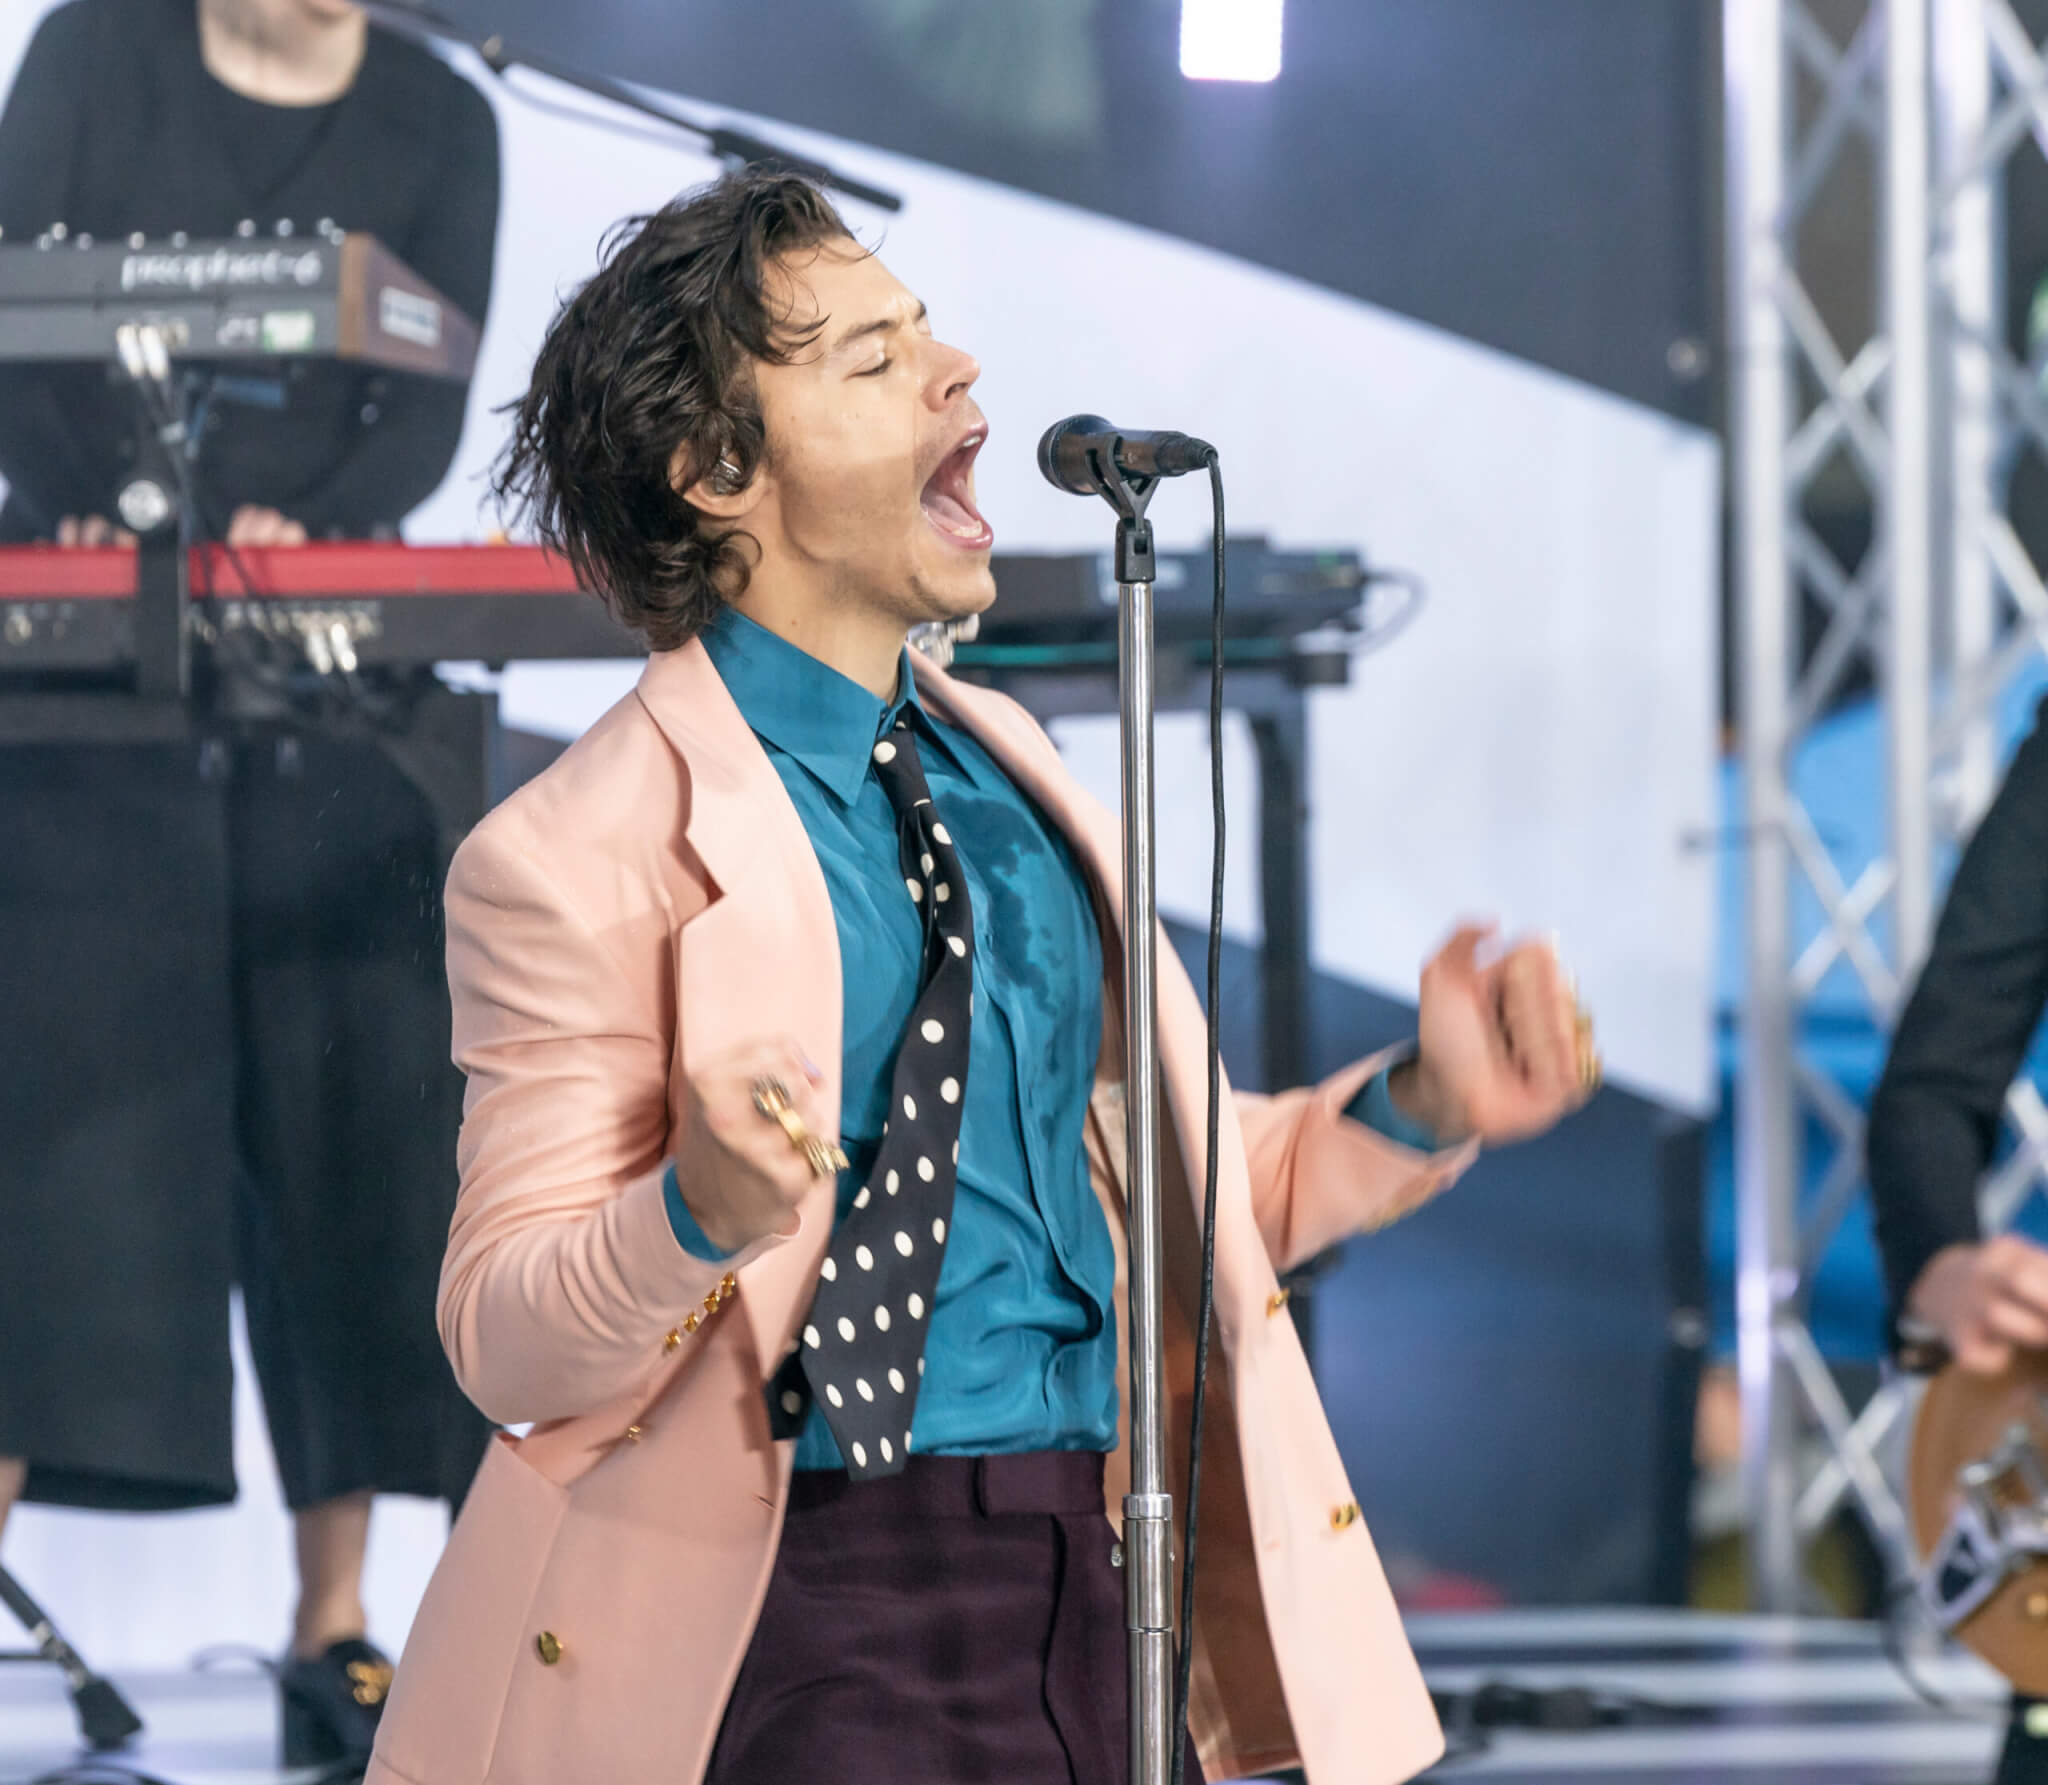 Harry Styles performs on stage during Citi Concert Series on NBC TODAY SHOW in 2020 